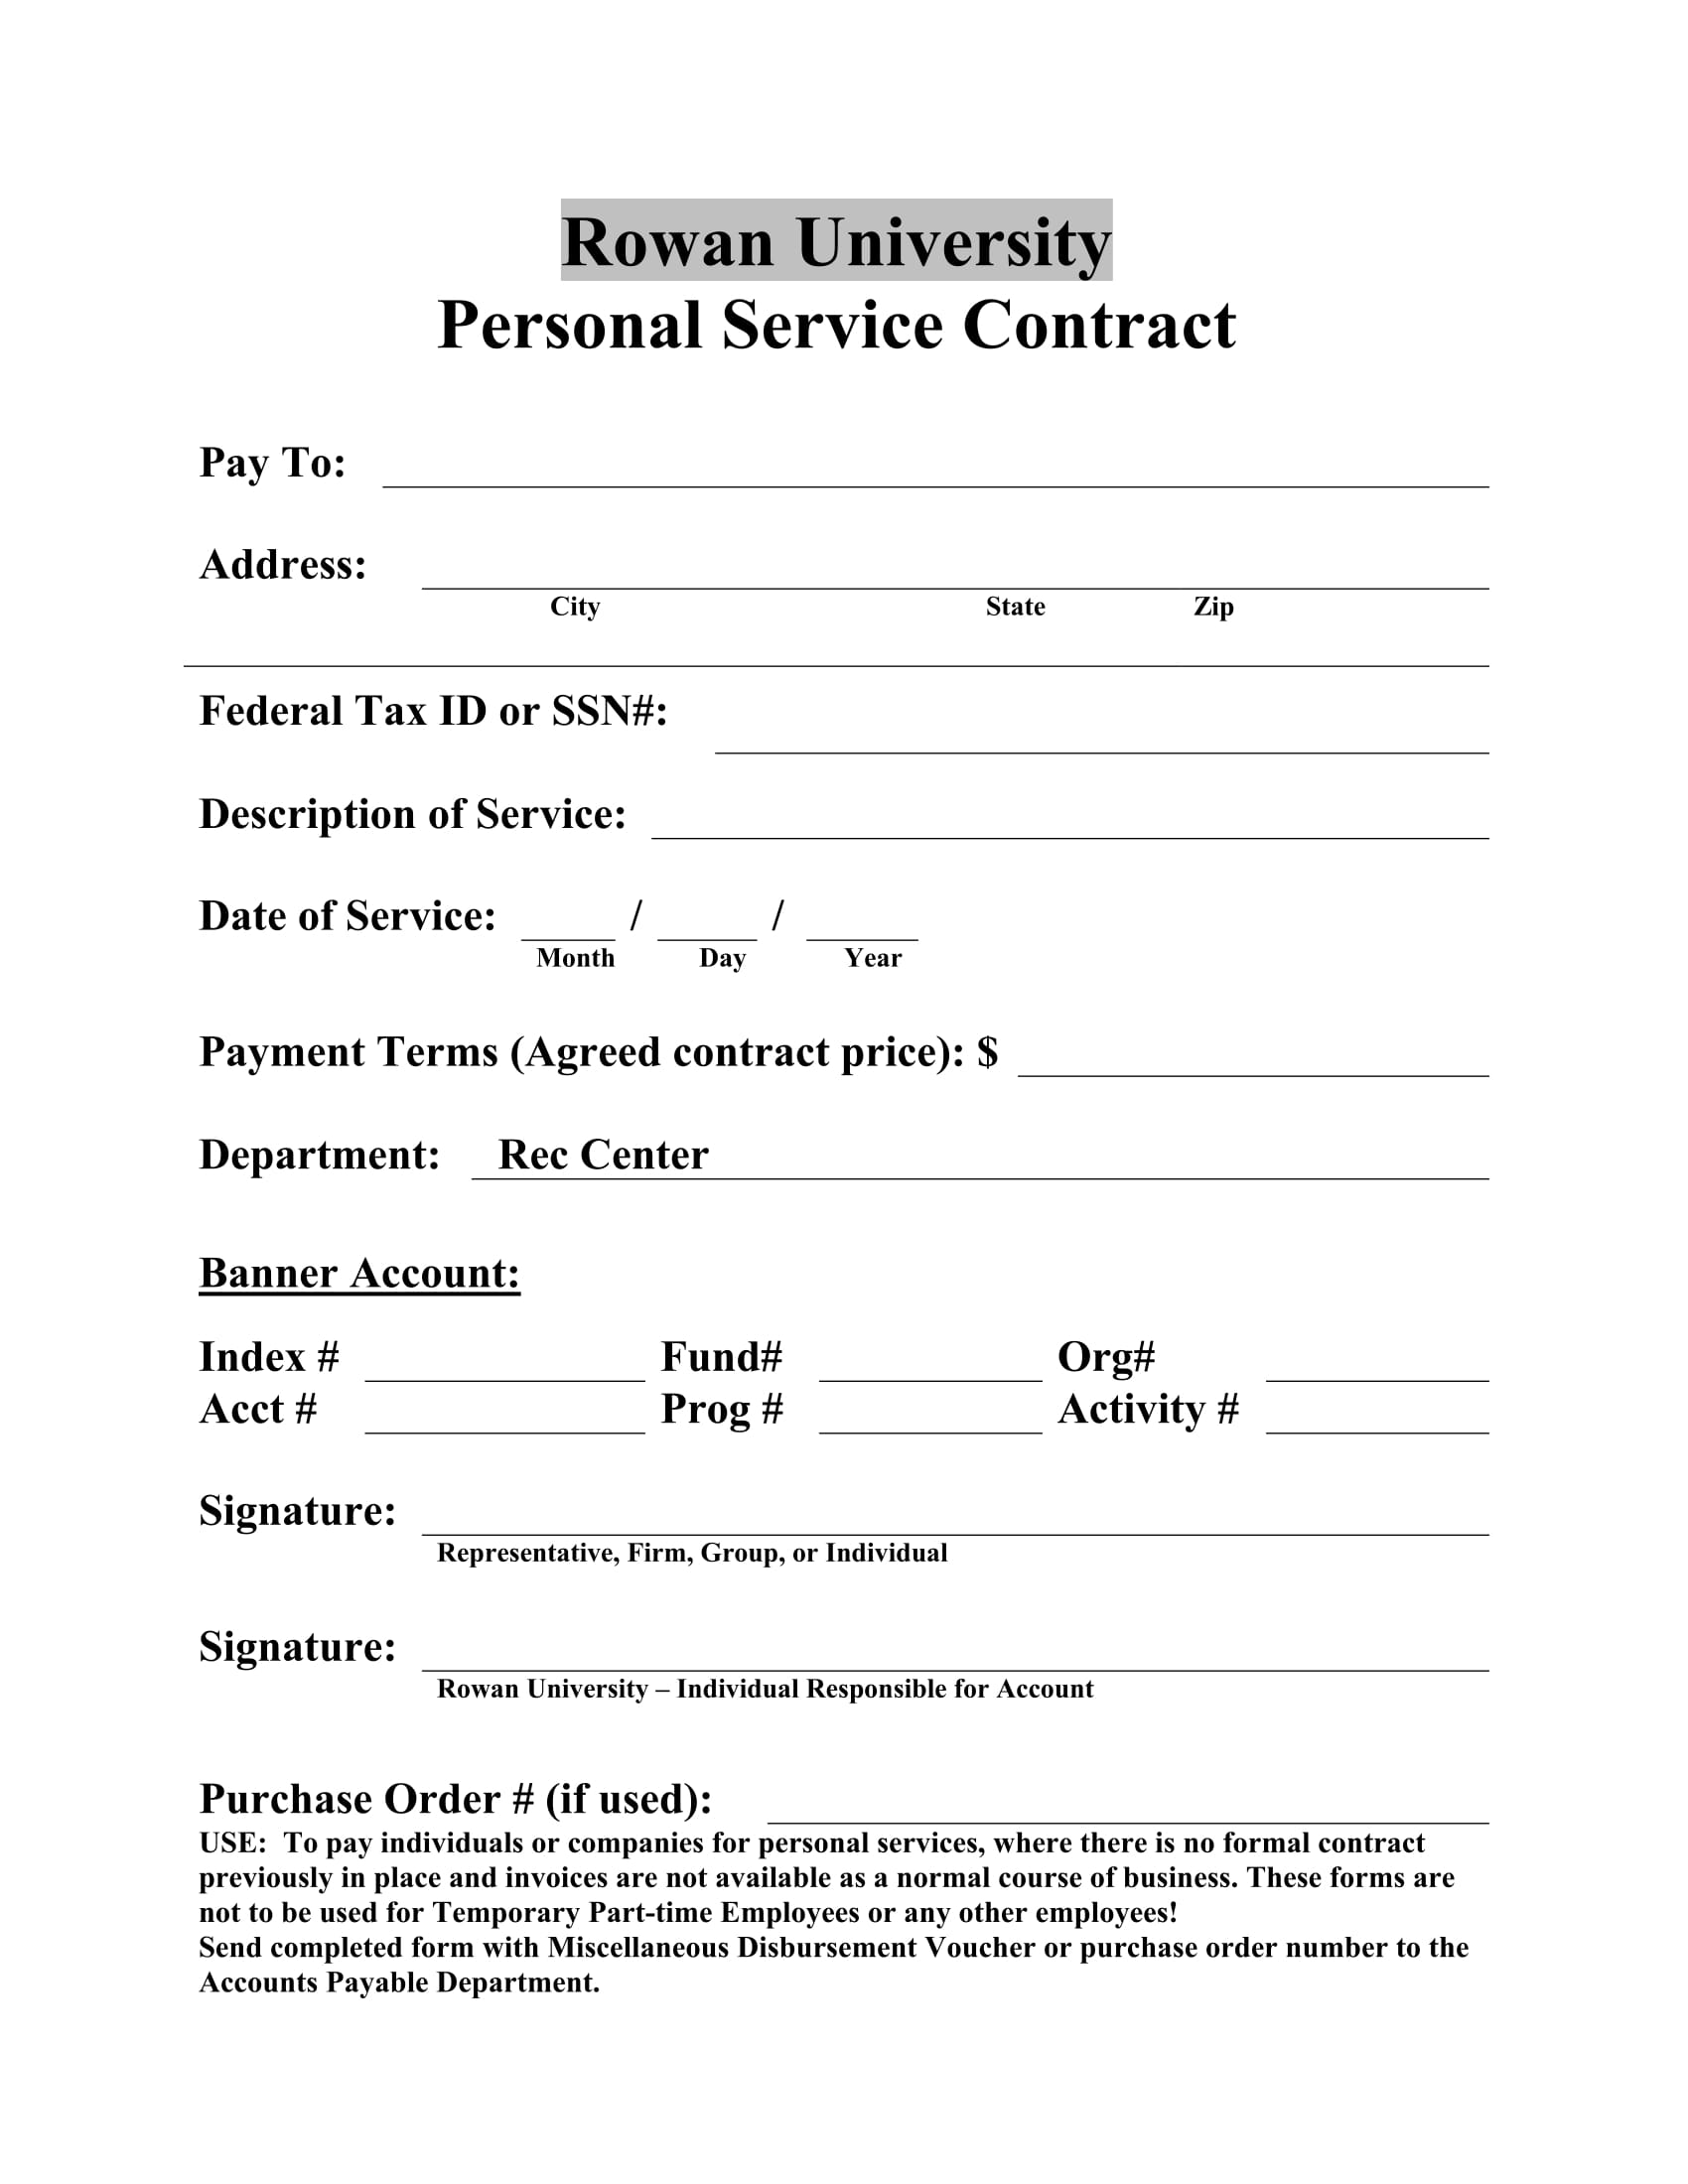 personal service contract 1